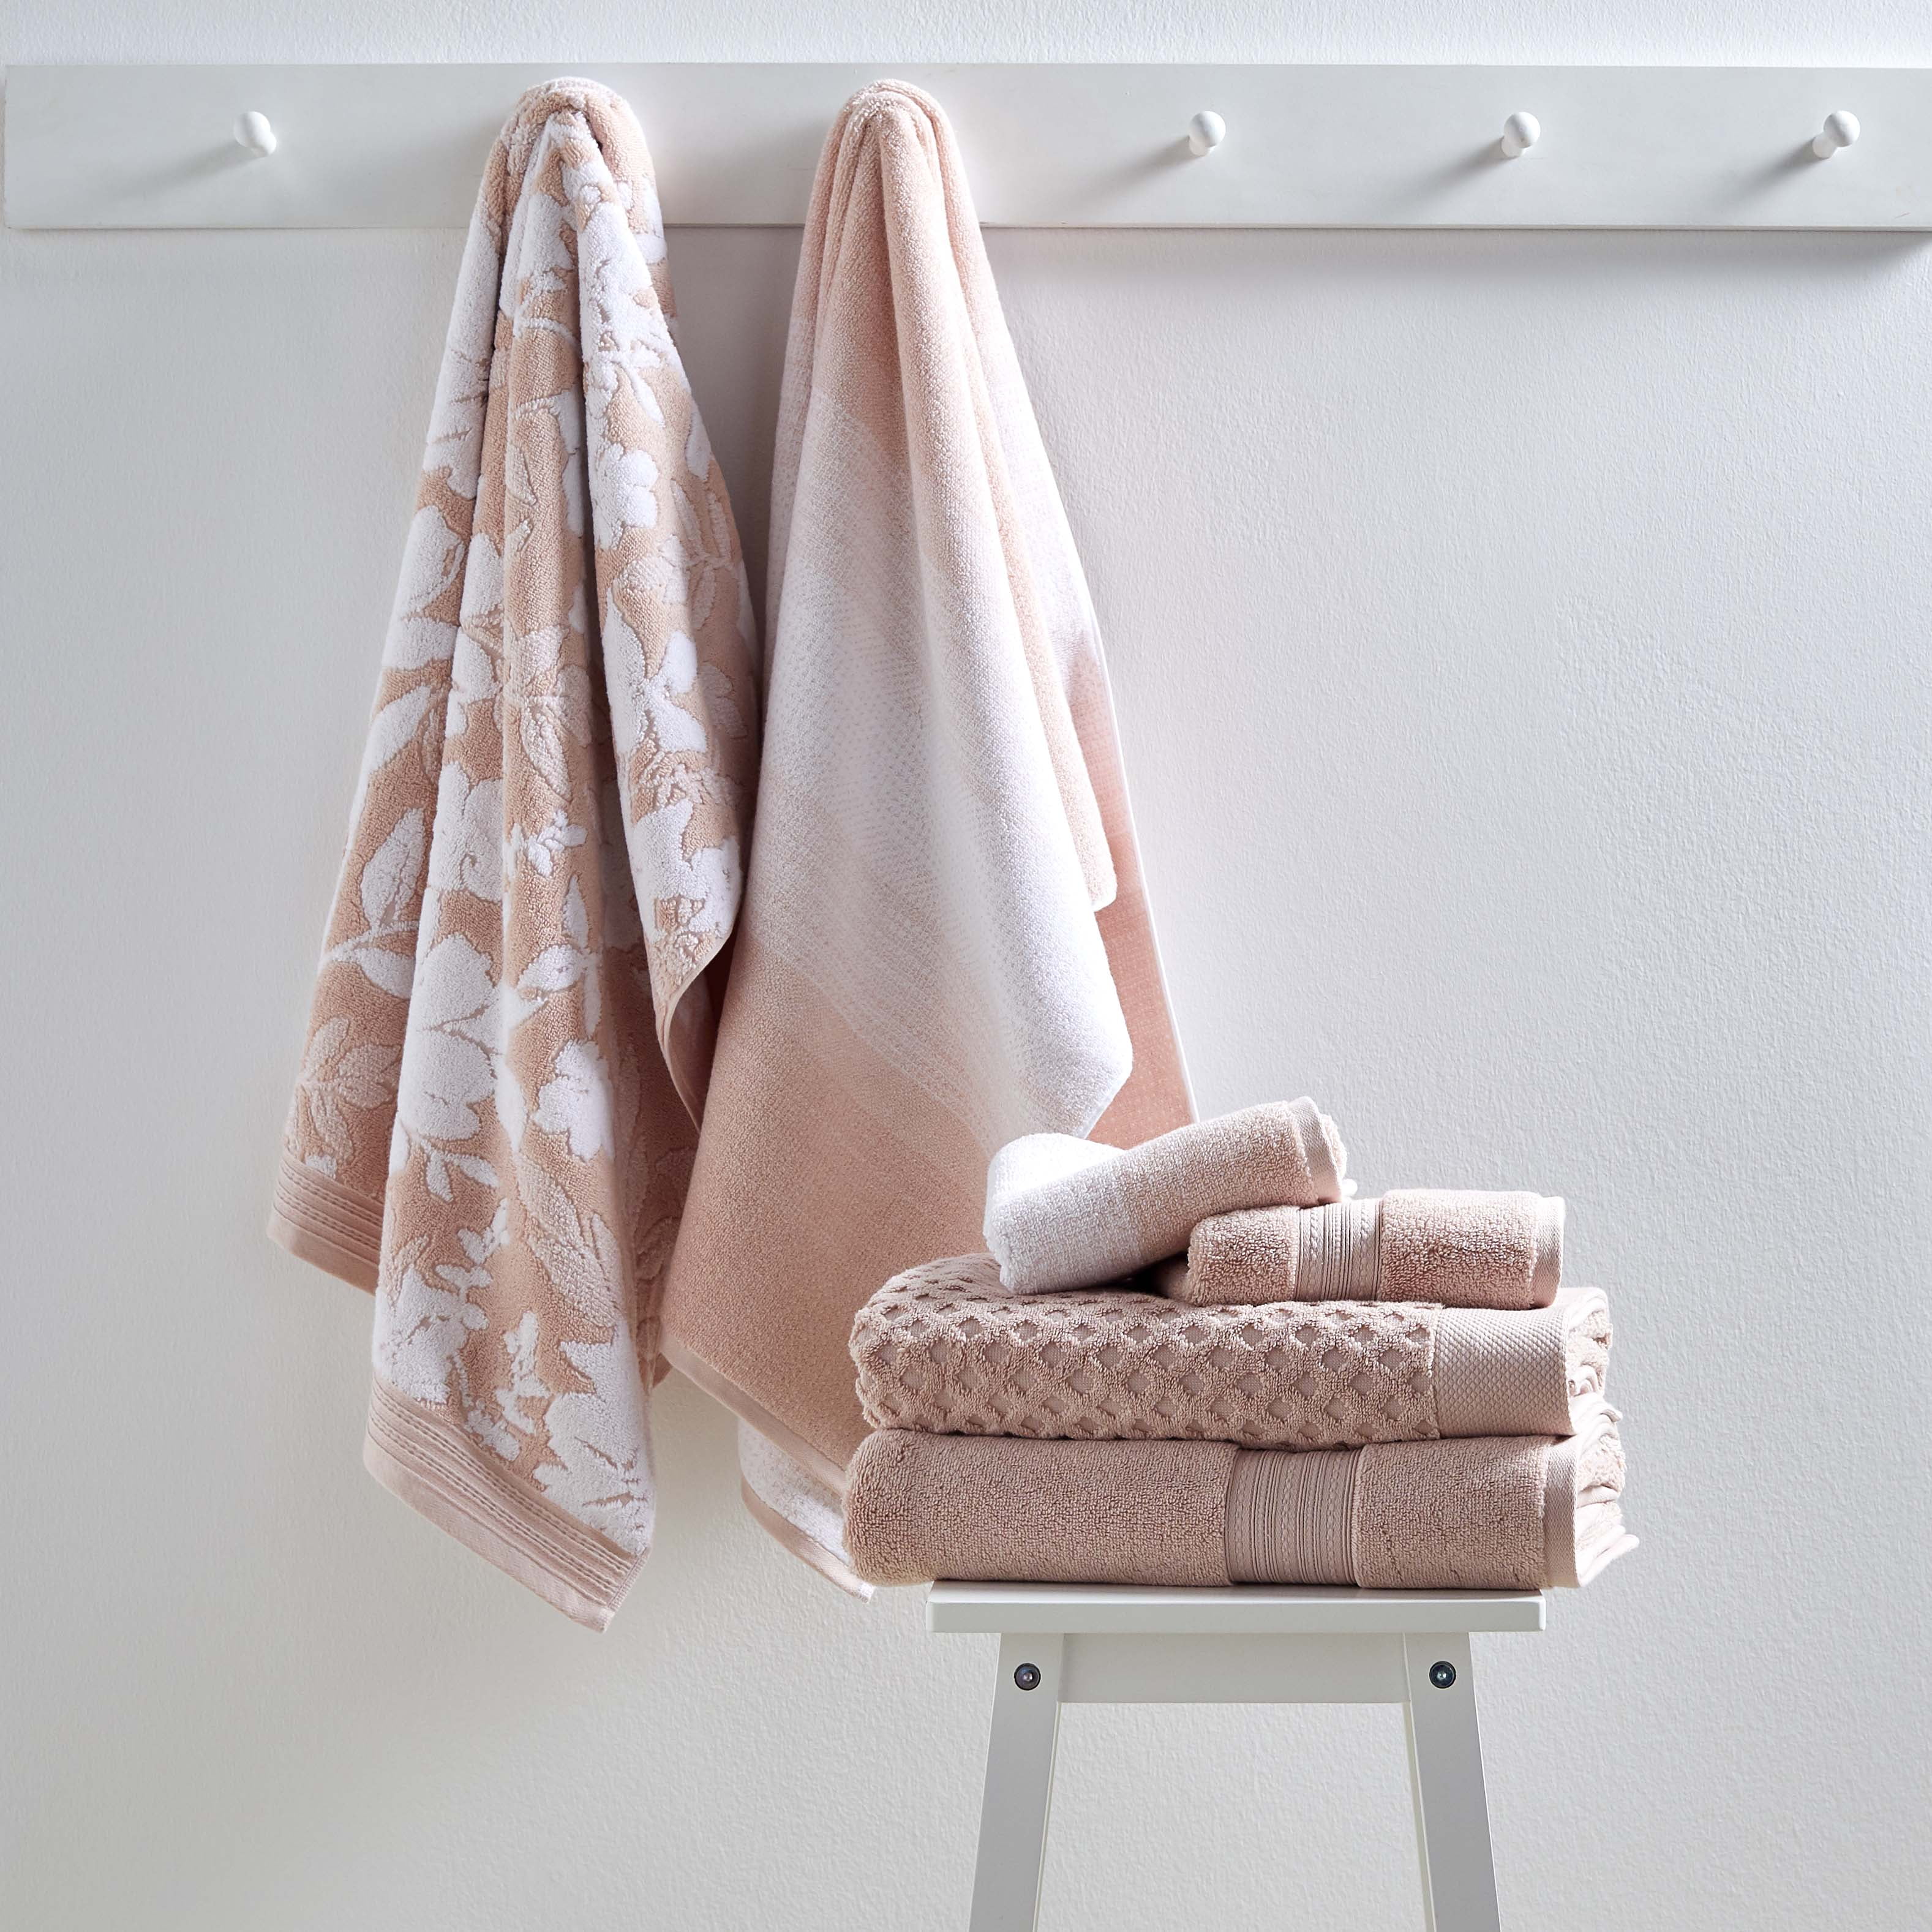 s bestselling bath towel set is 40% off right now - TheStreet